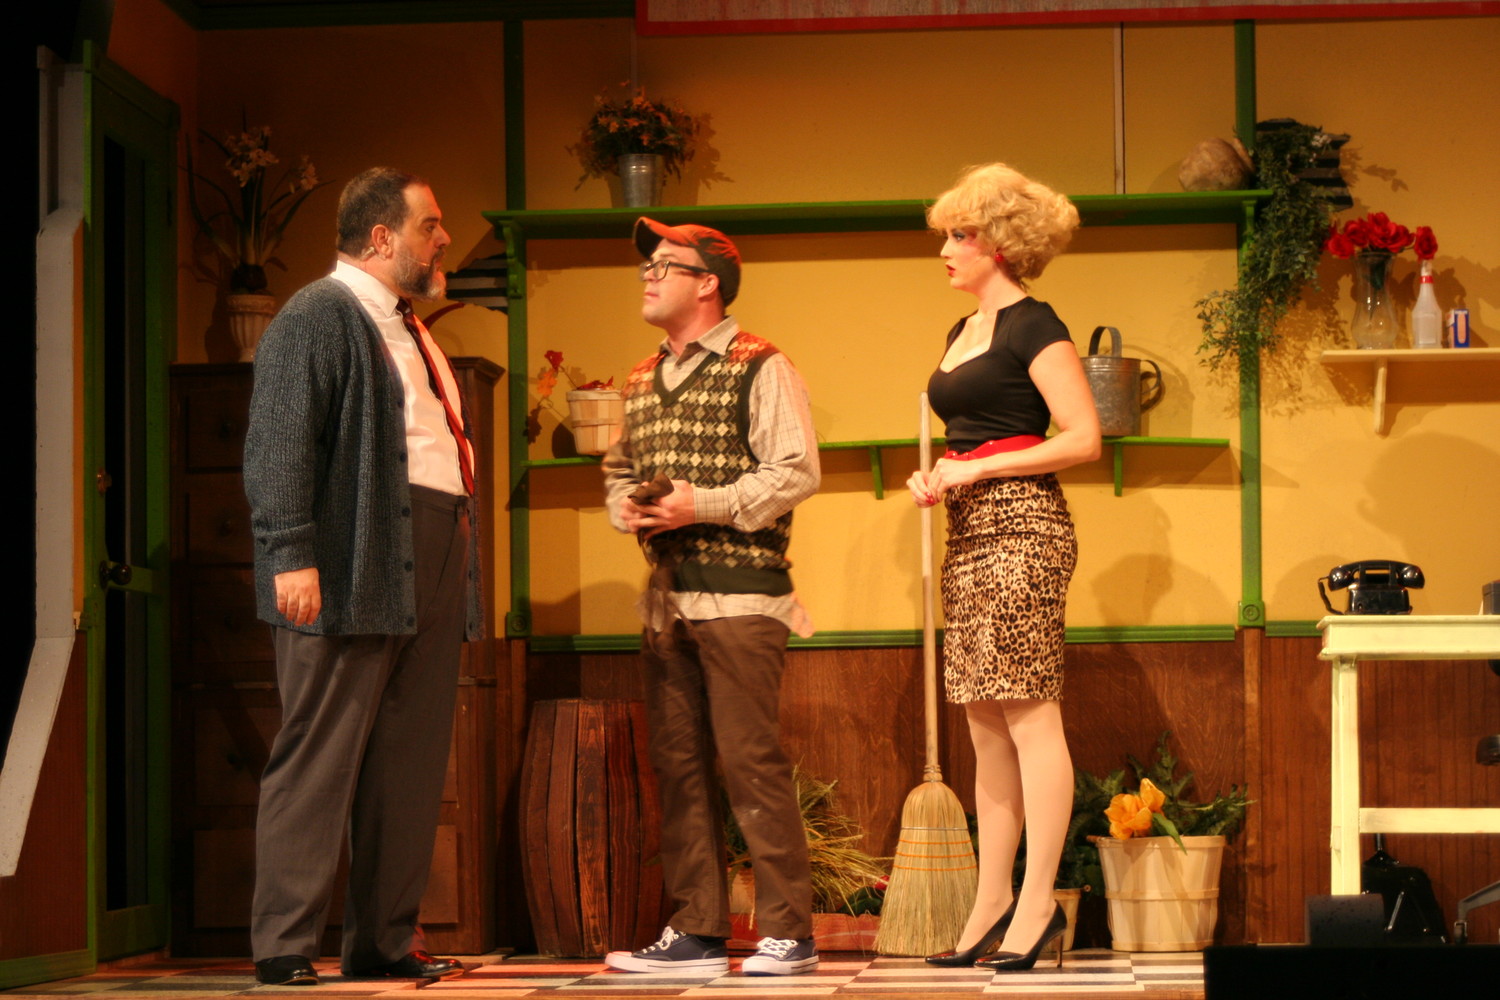 Seymour (center) and Audrey converse with their boss, Mr. Mushnik, at the flower shop